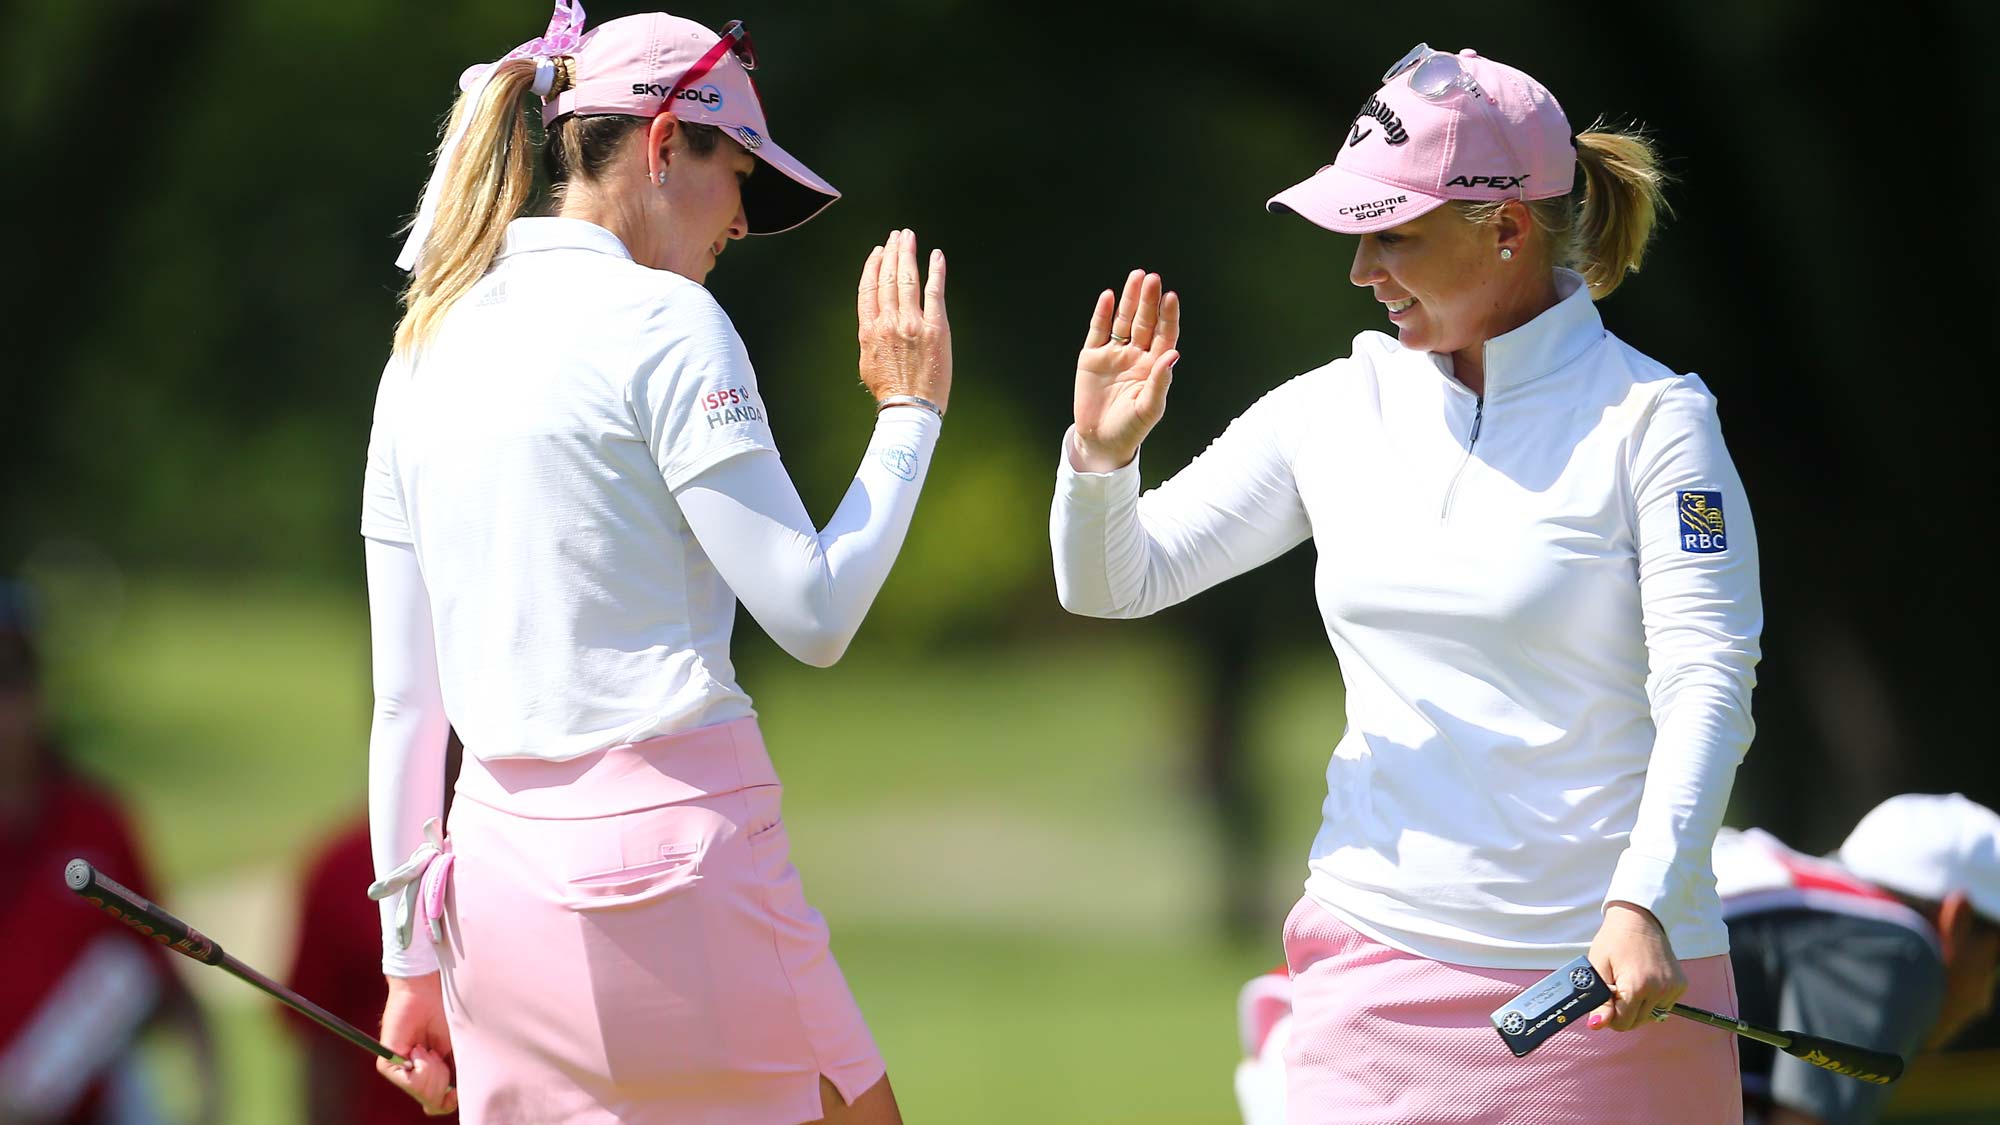 (R-L) Morgan Pressel celebrates her birdie putt with Paula Creamer on the 12th hole during the first round of the Dow Great Lakes Bay Invitational 